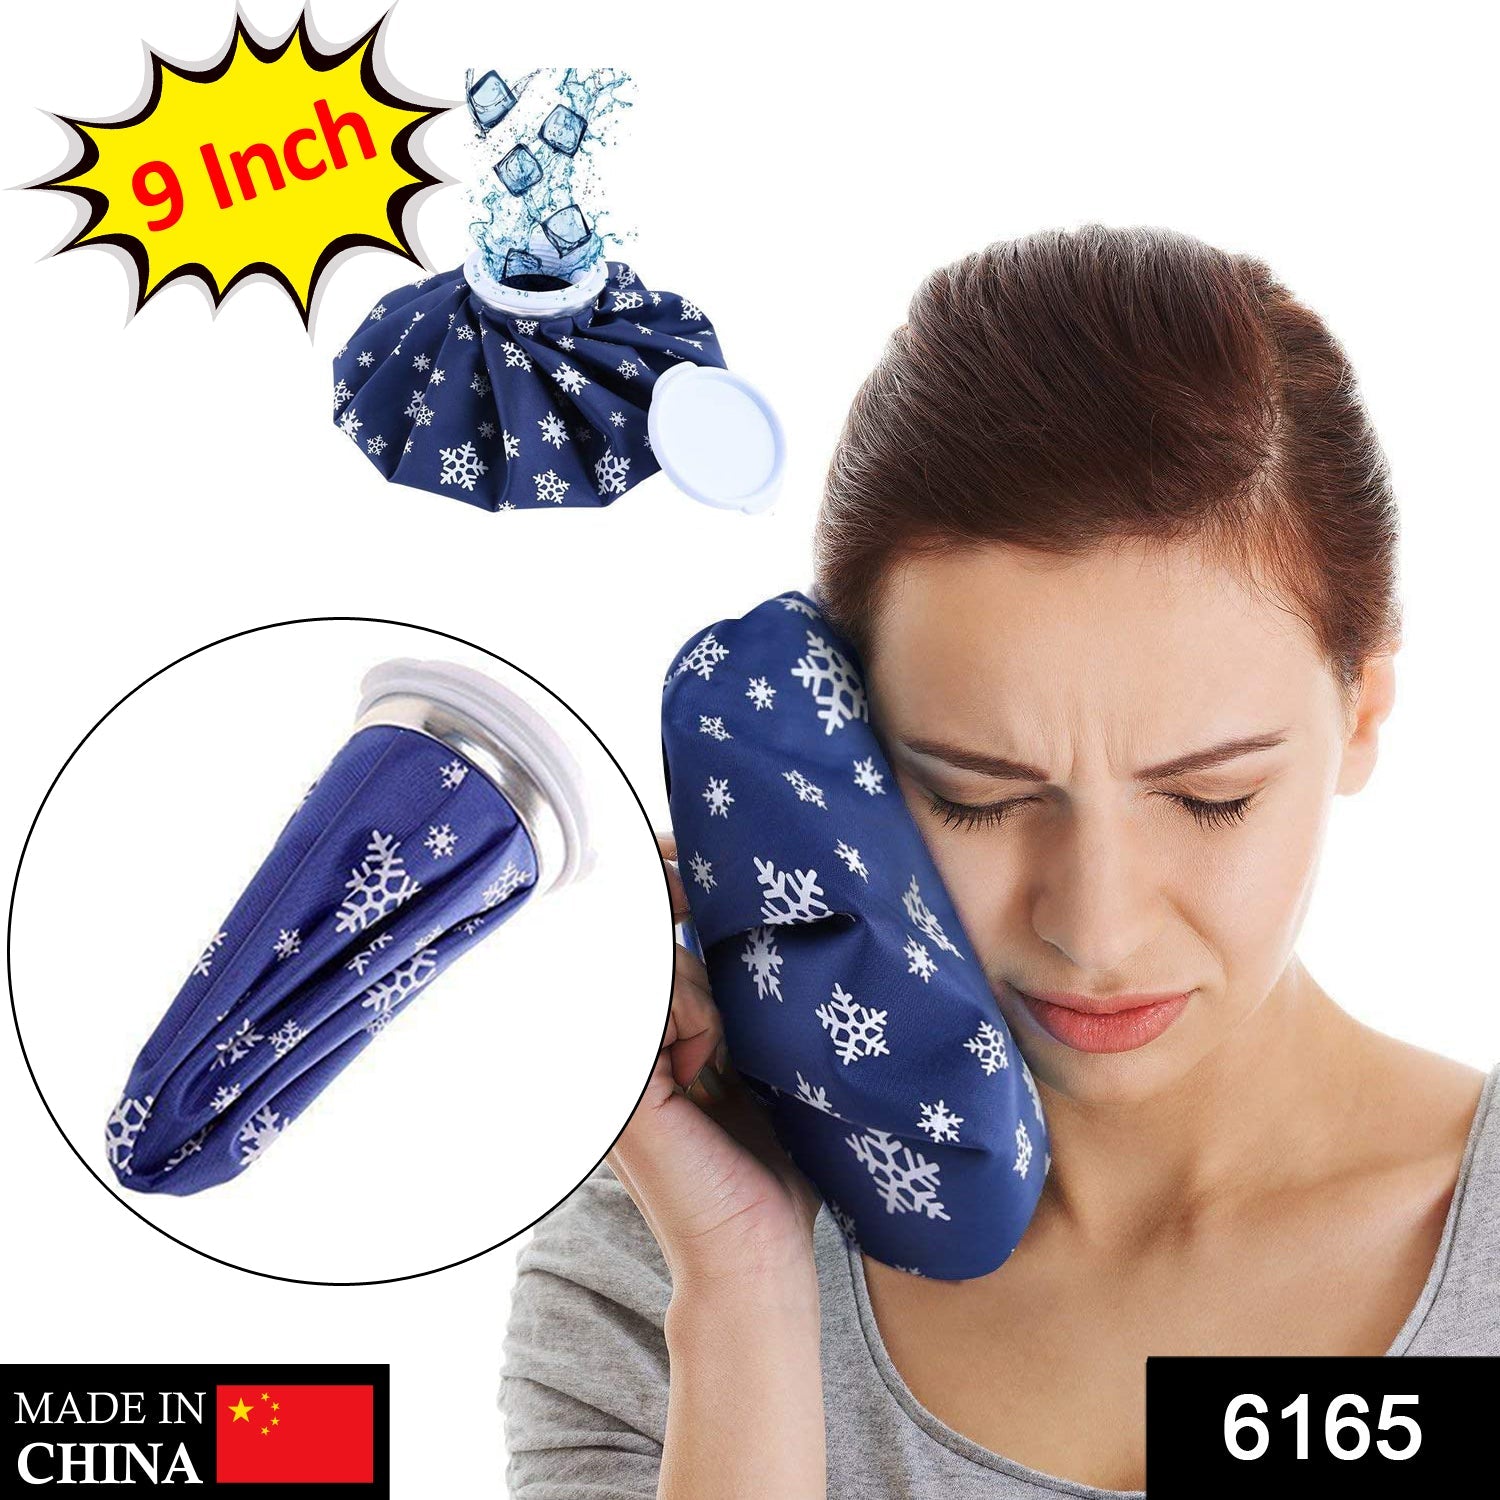 6165 Pain Reliever Ice Bag Used To Overcome Joints Pain In Body. 